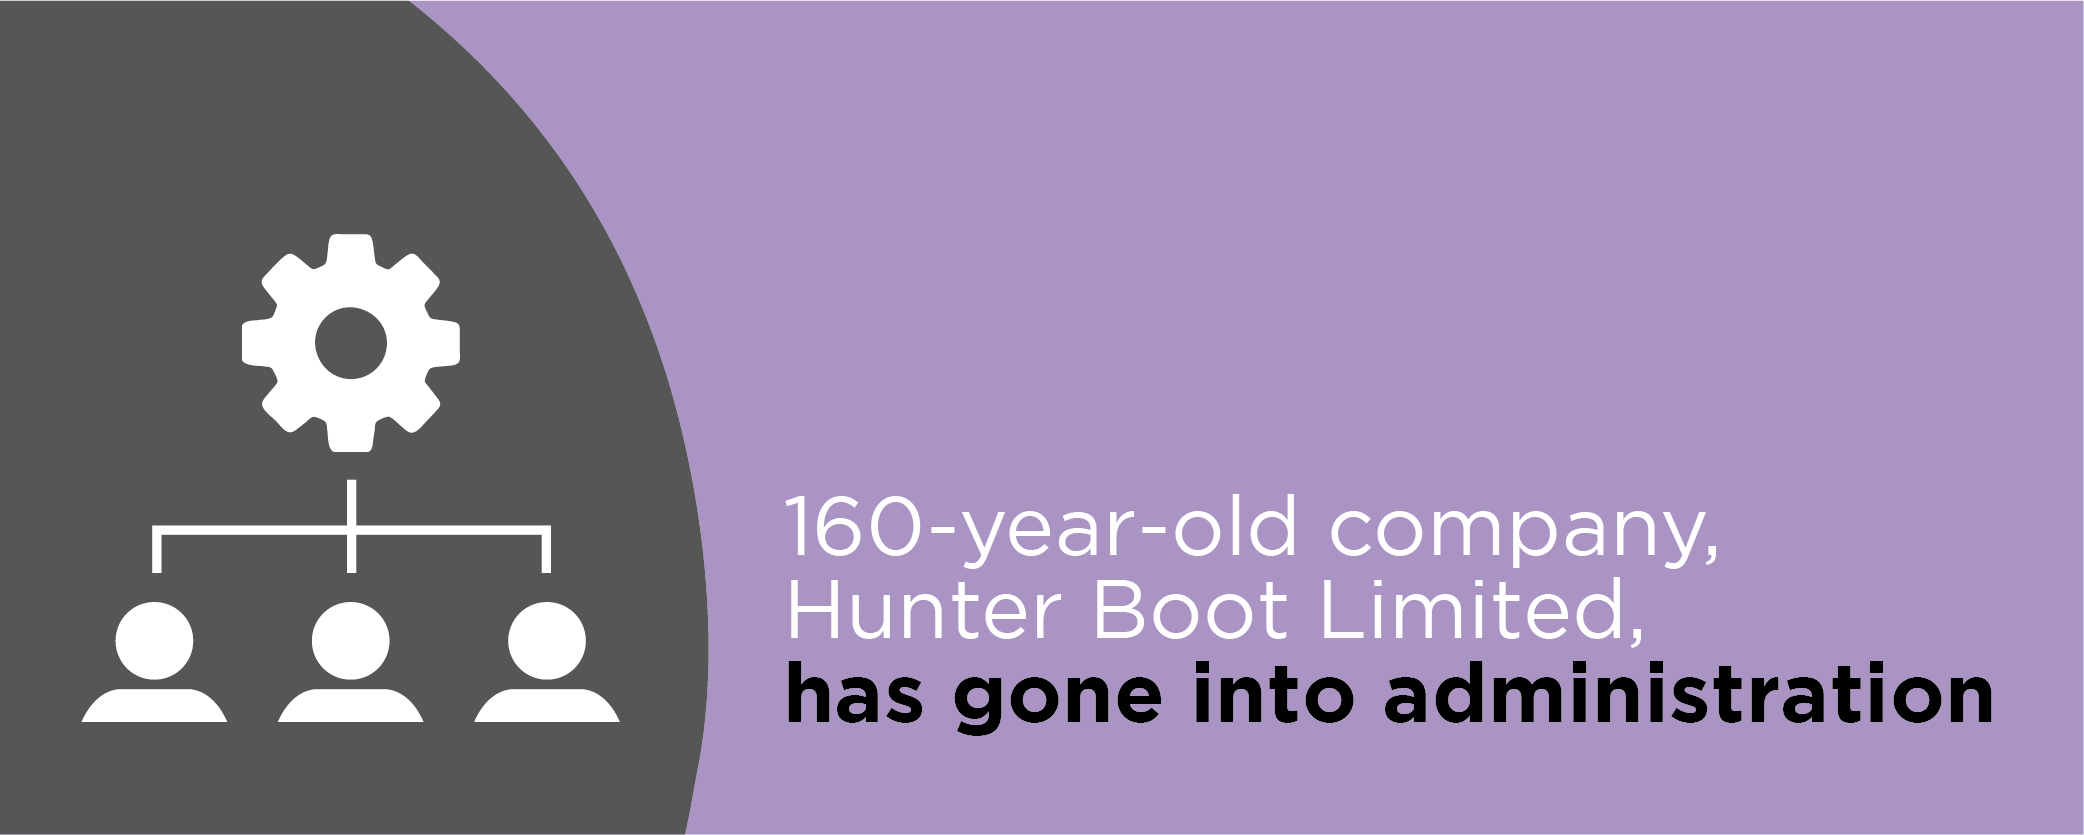 160-year-old company, Hunter Boot Limited, has gone into administration